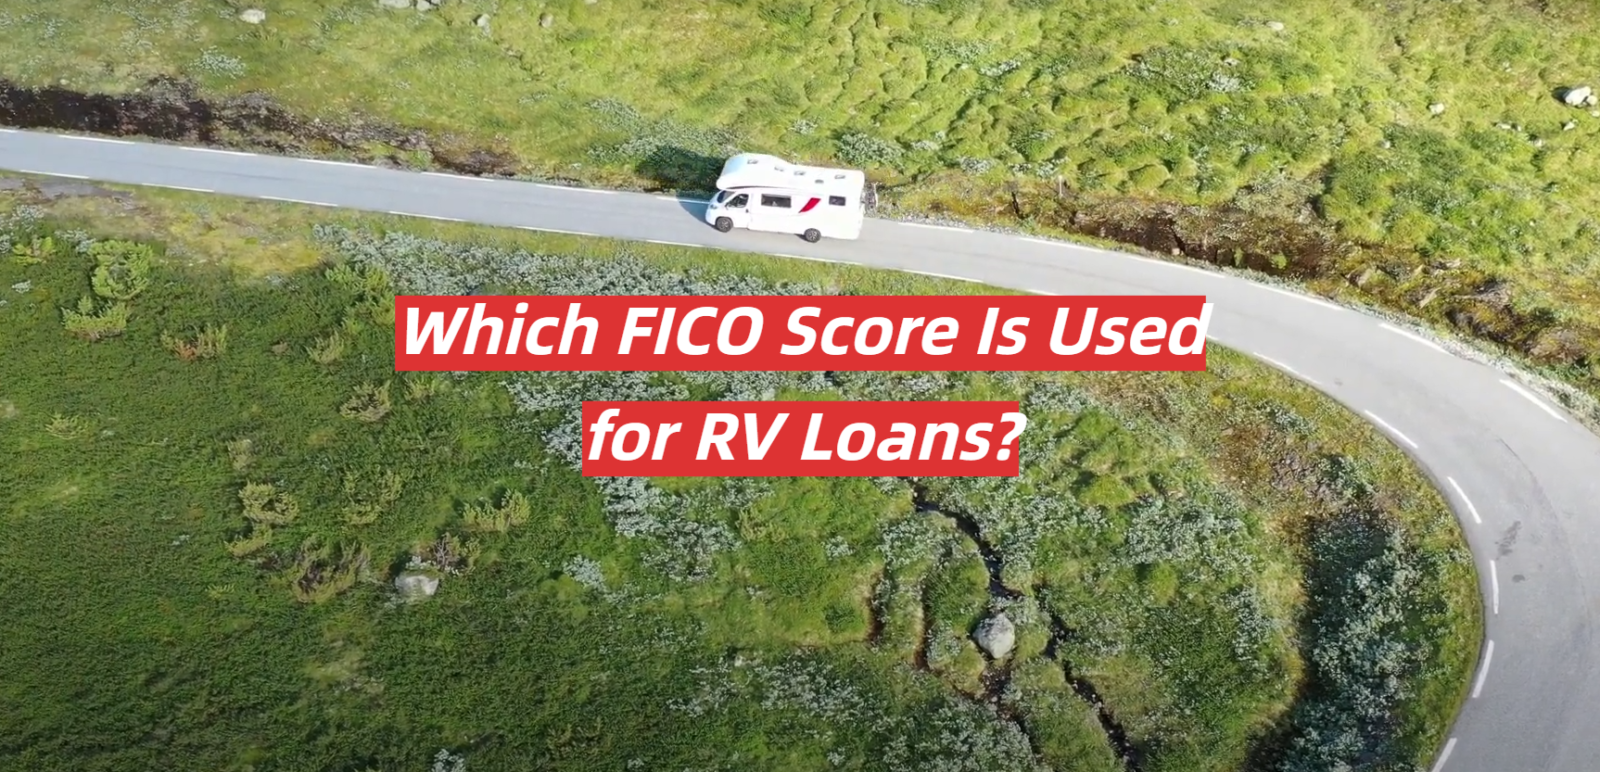 Which FICO Score Is Used for RV Loans?